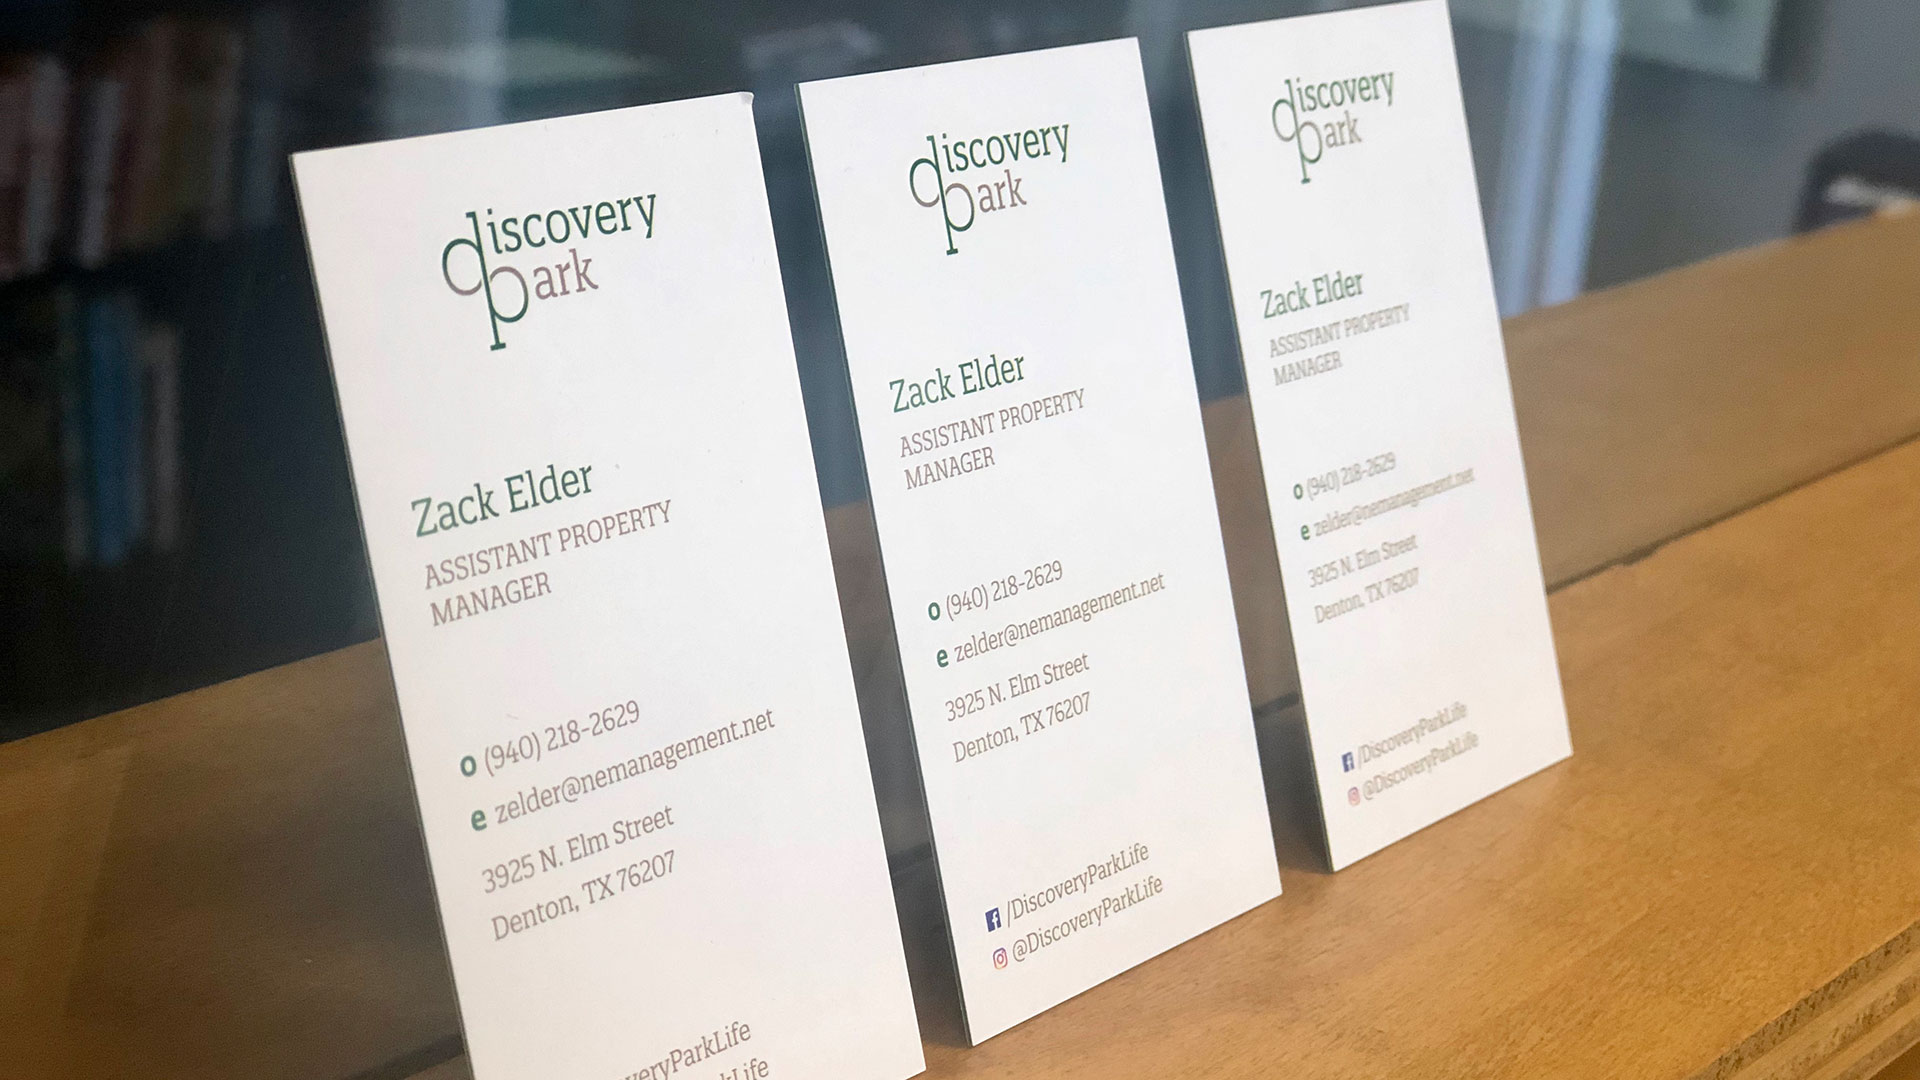 A mock-up image to showcase the Discovery Park swag and multifamily branding that our multifamily marketing agency designed and executed for the client.